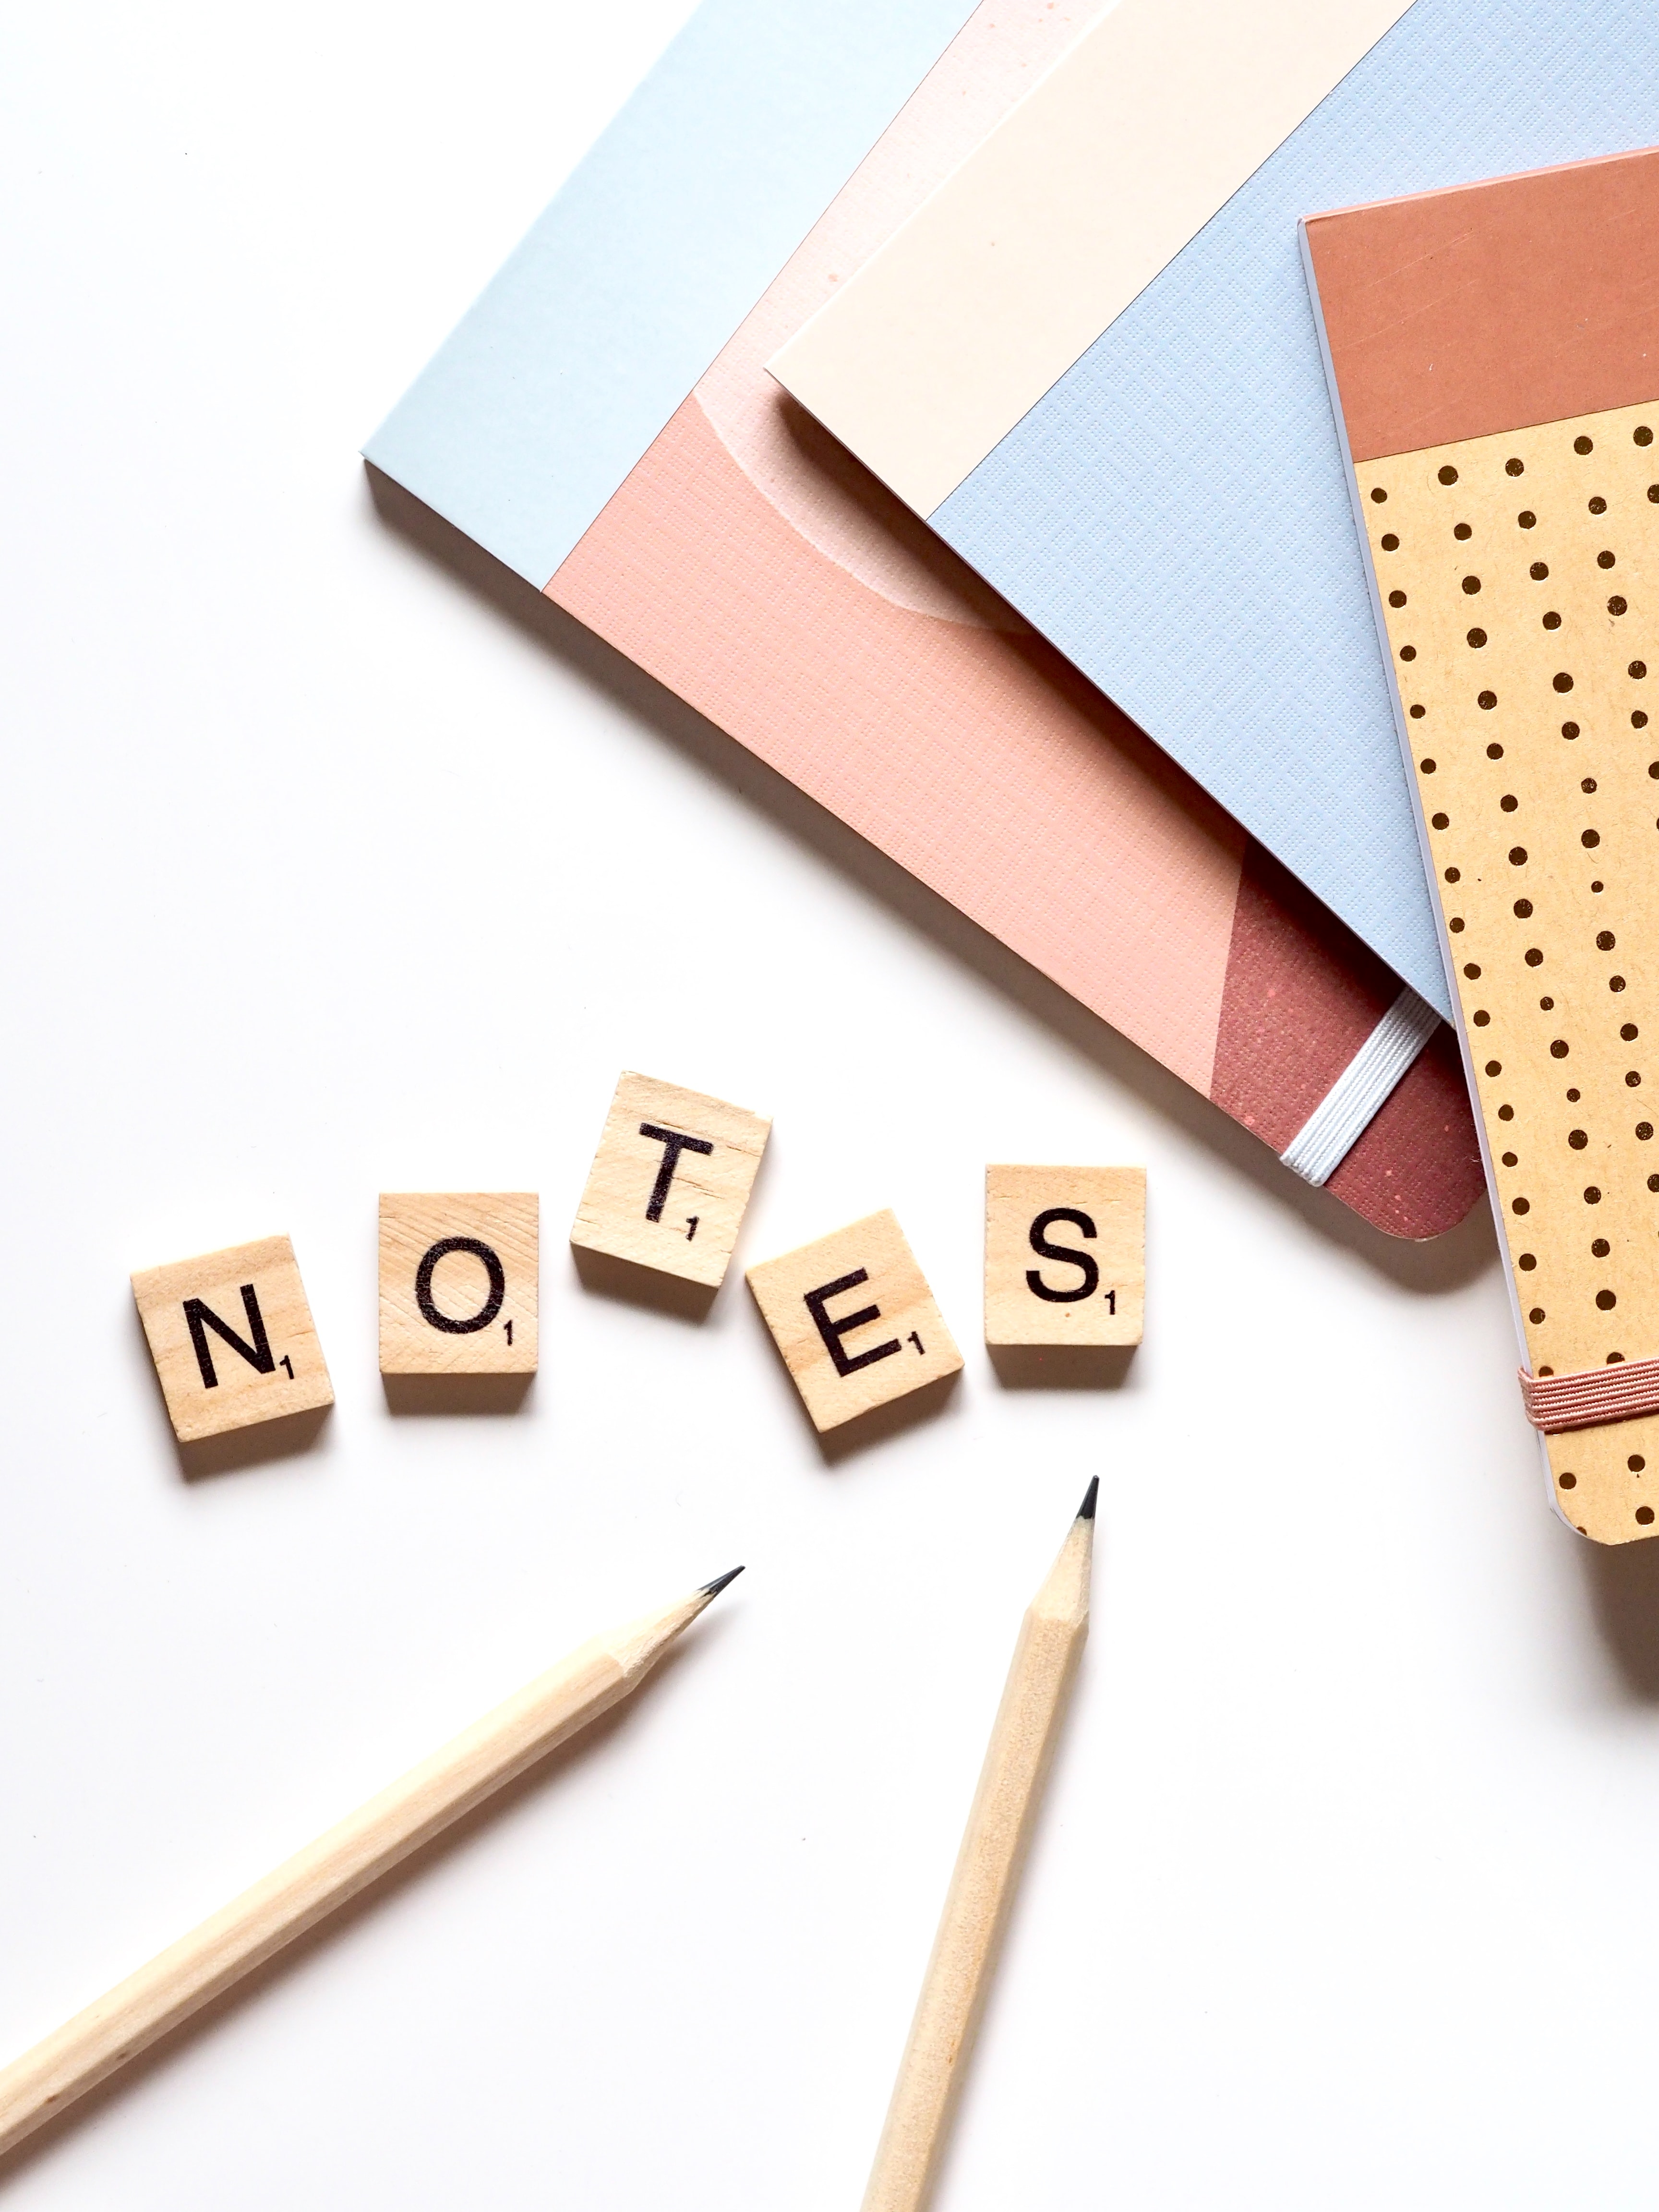 music, words, inscription, pencil, notebook, cubes, notes, notebooks